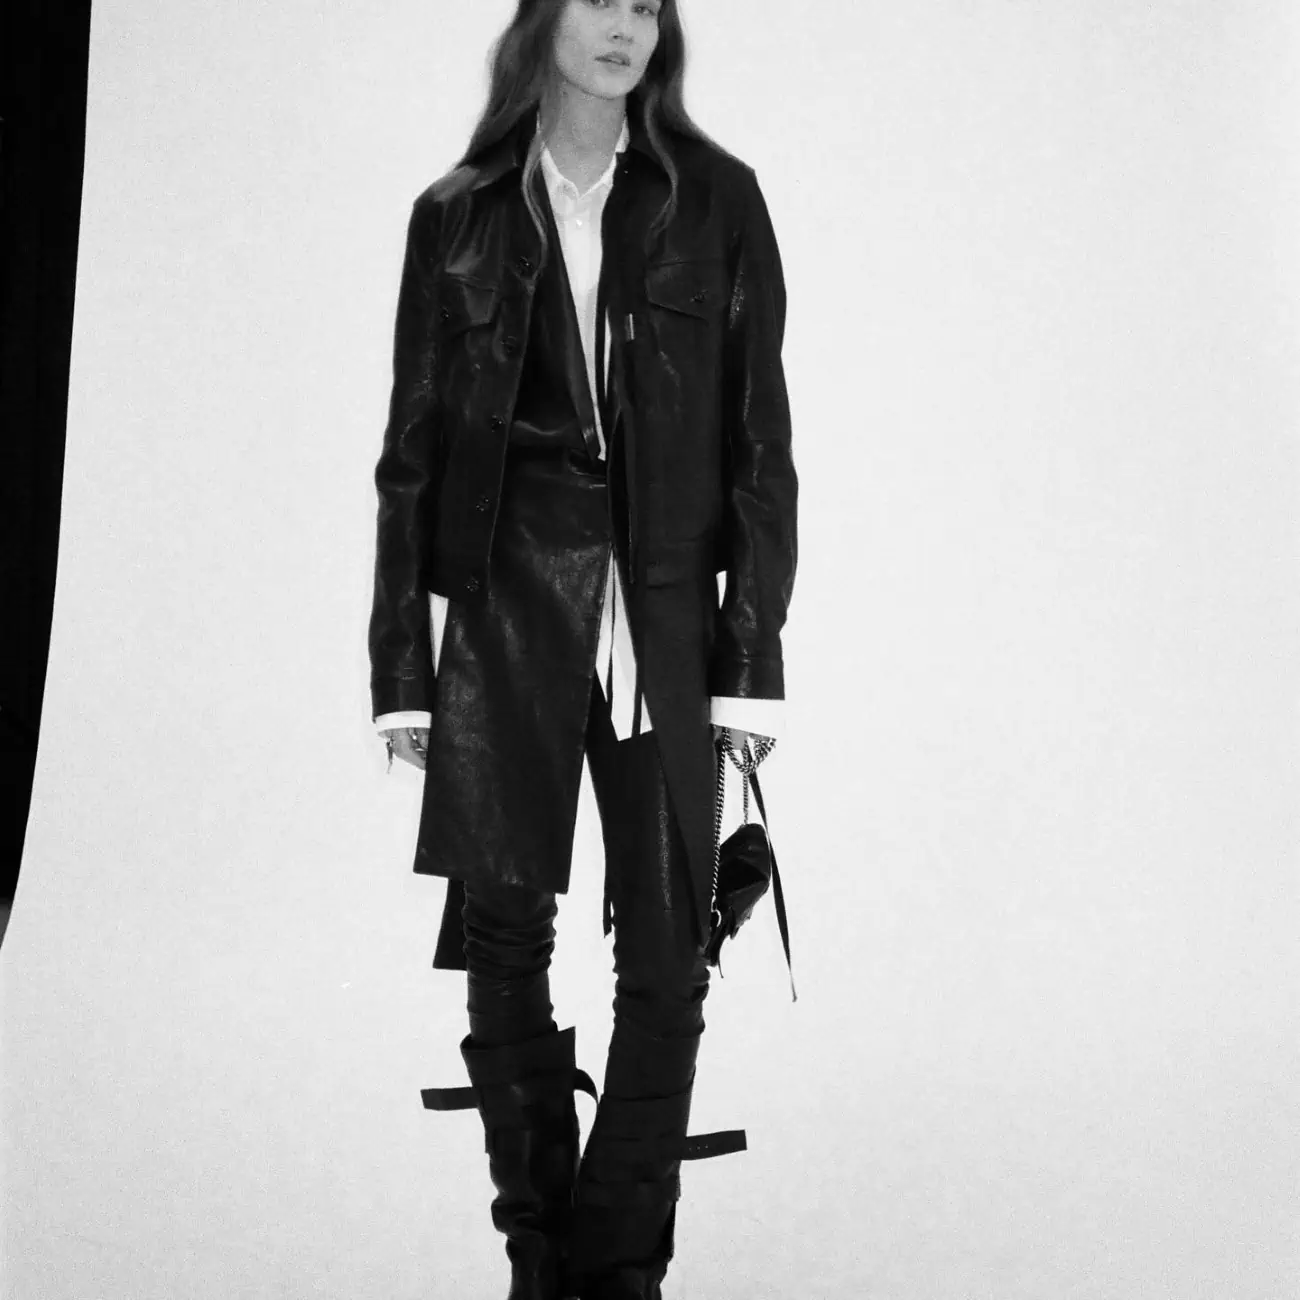 Ann Demeulemeester unveils Stefano Gallici's first Pre-collection for Resort 2025